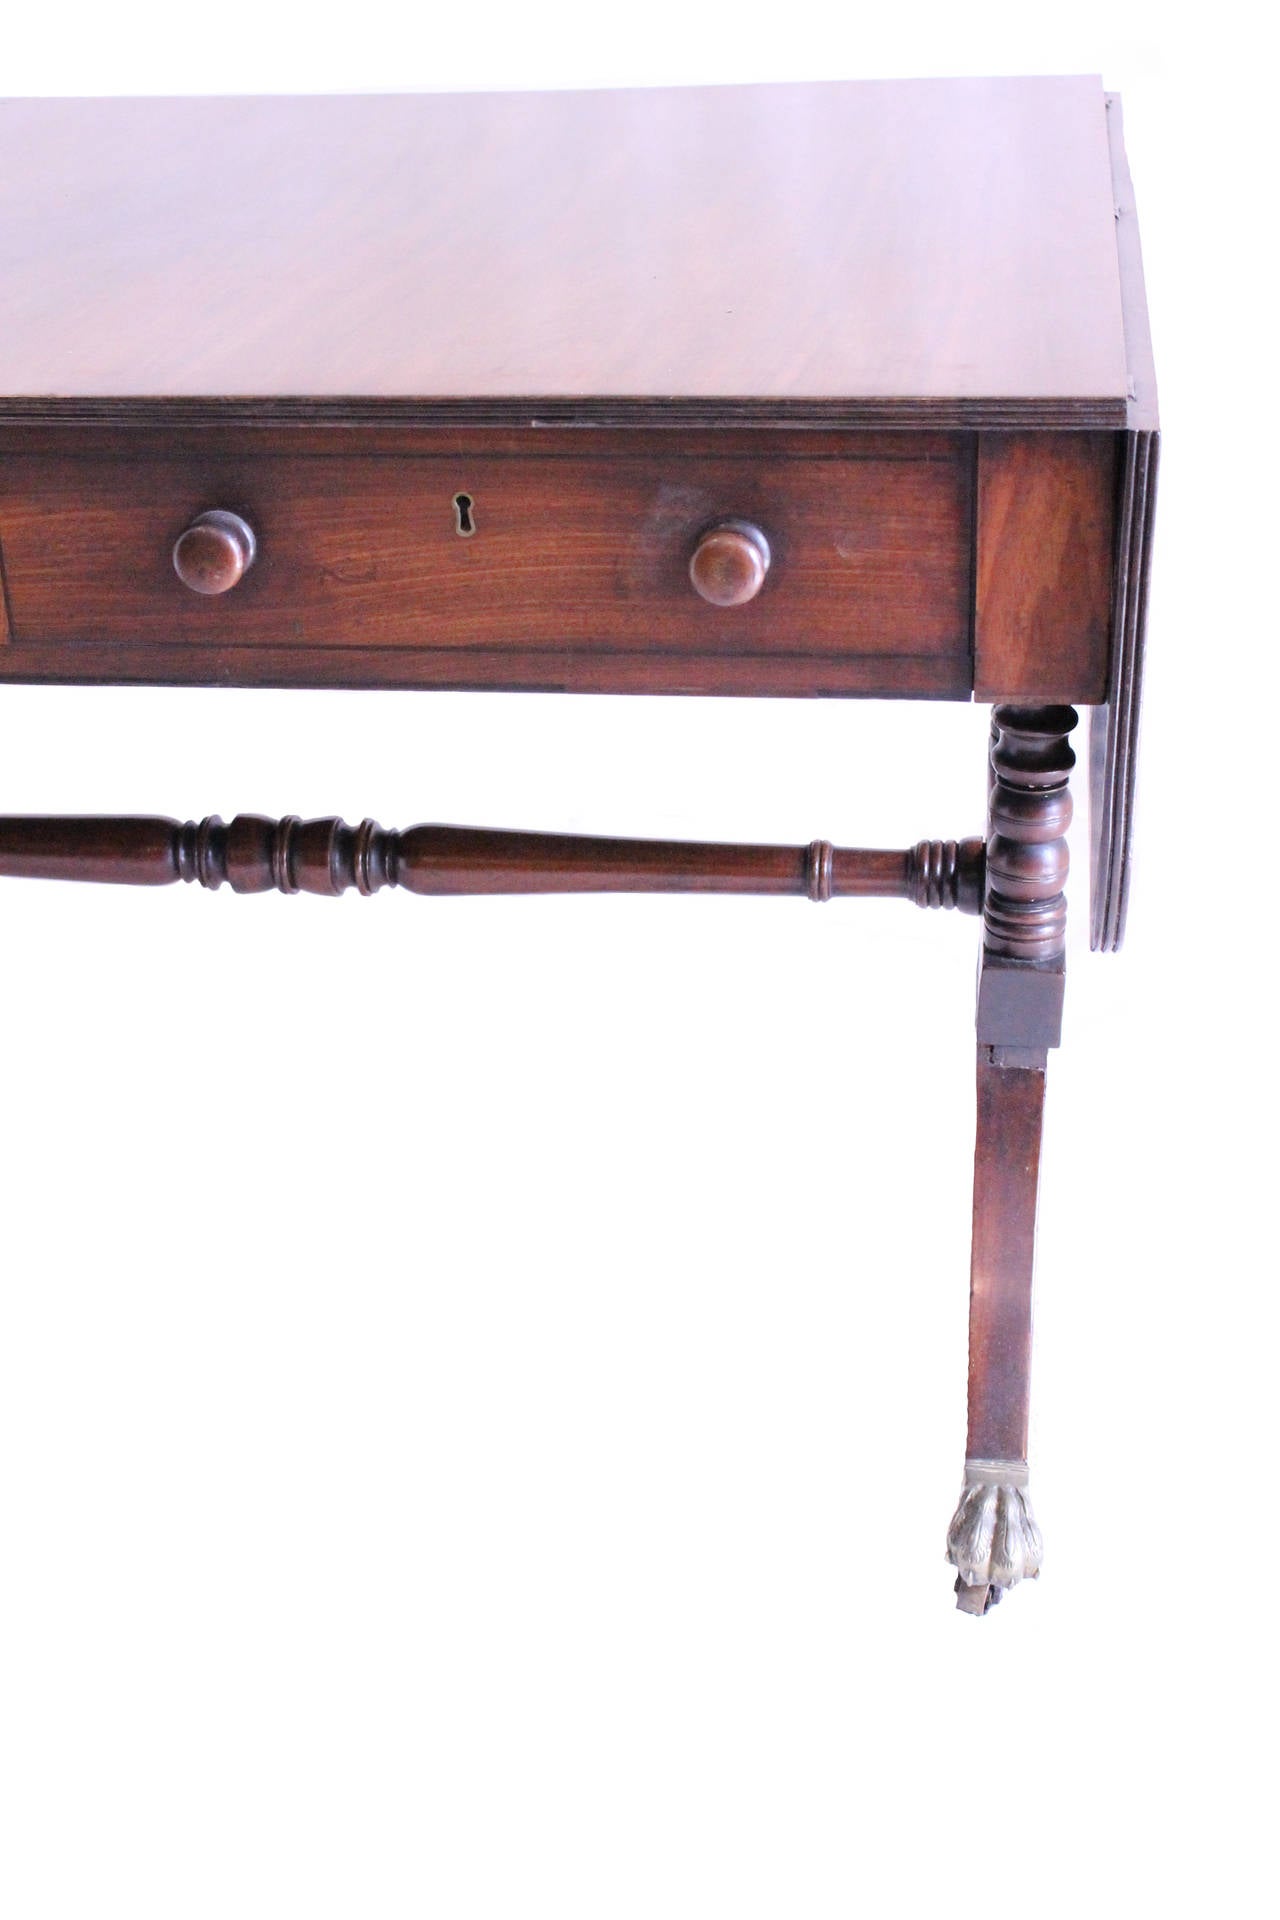 19th century Mahogany supported by turned legs ending in brass ball and claw feet. Turned mahogany stretcher. Table has two drawers with wooden knobs and two drop leaves.